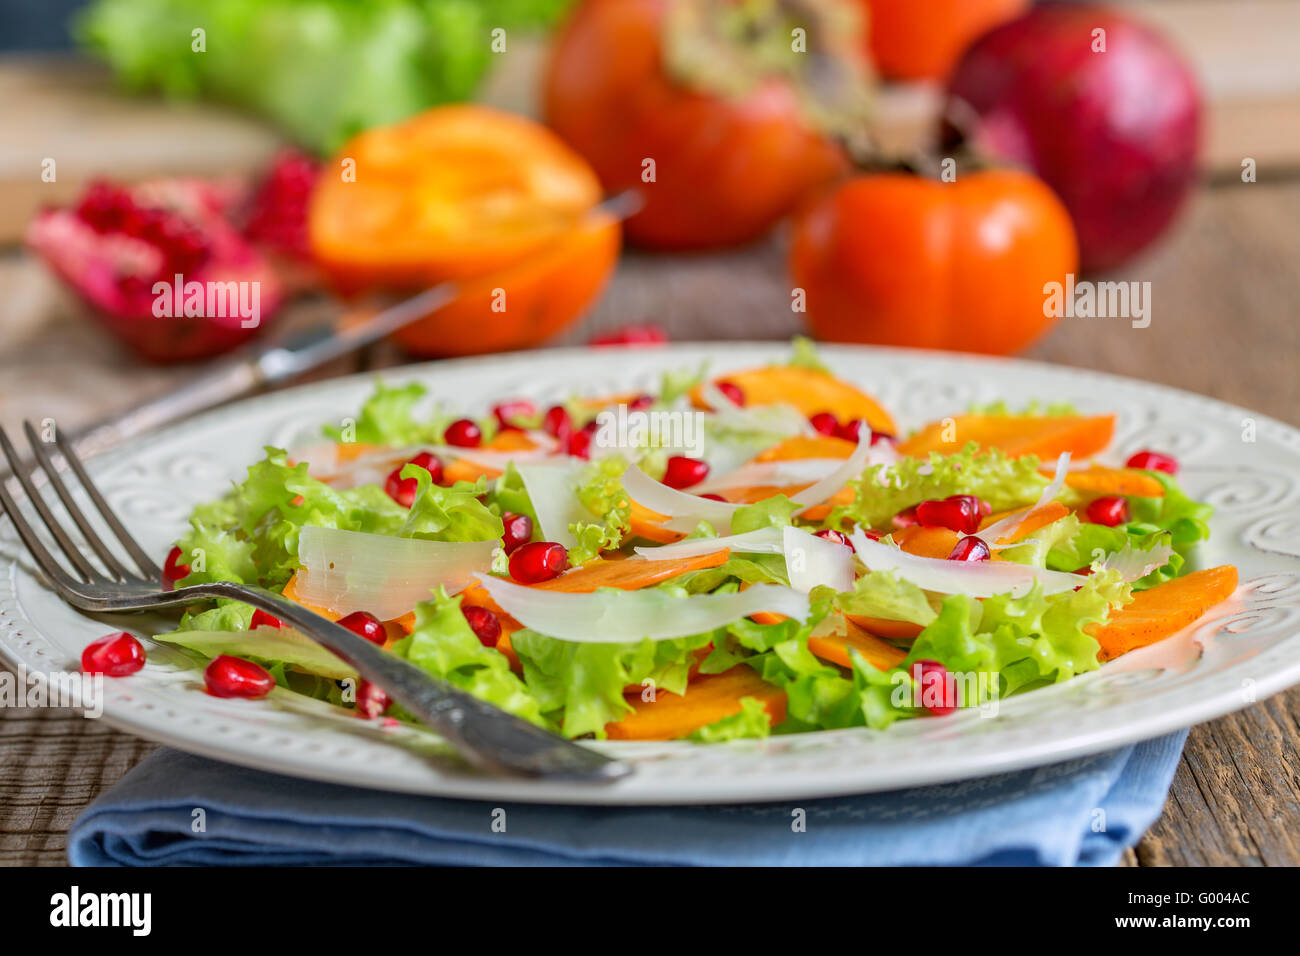 Delicious salad with persimmon. Healthy food. Stock Photo